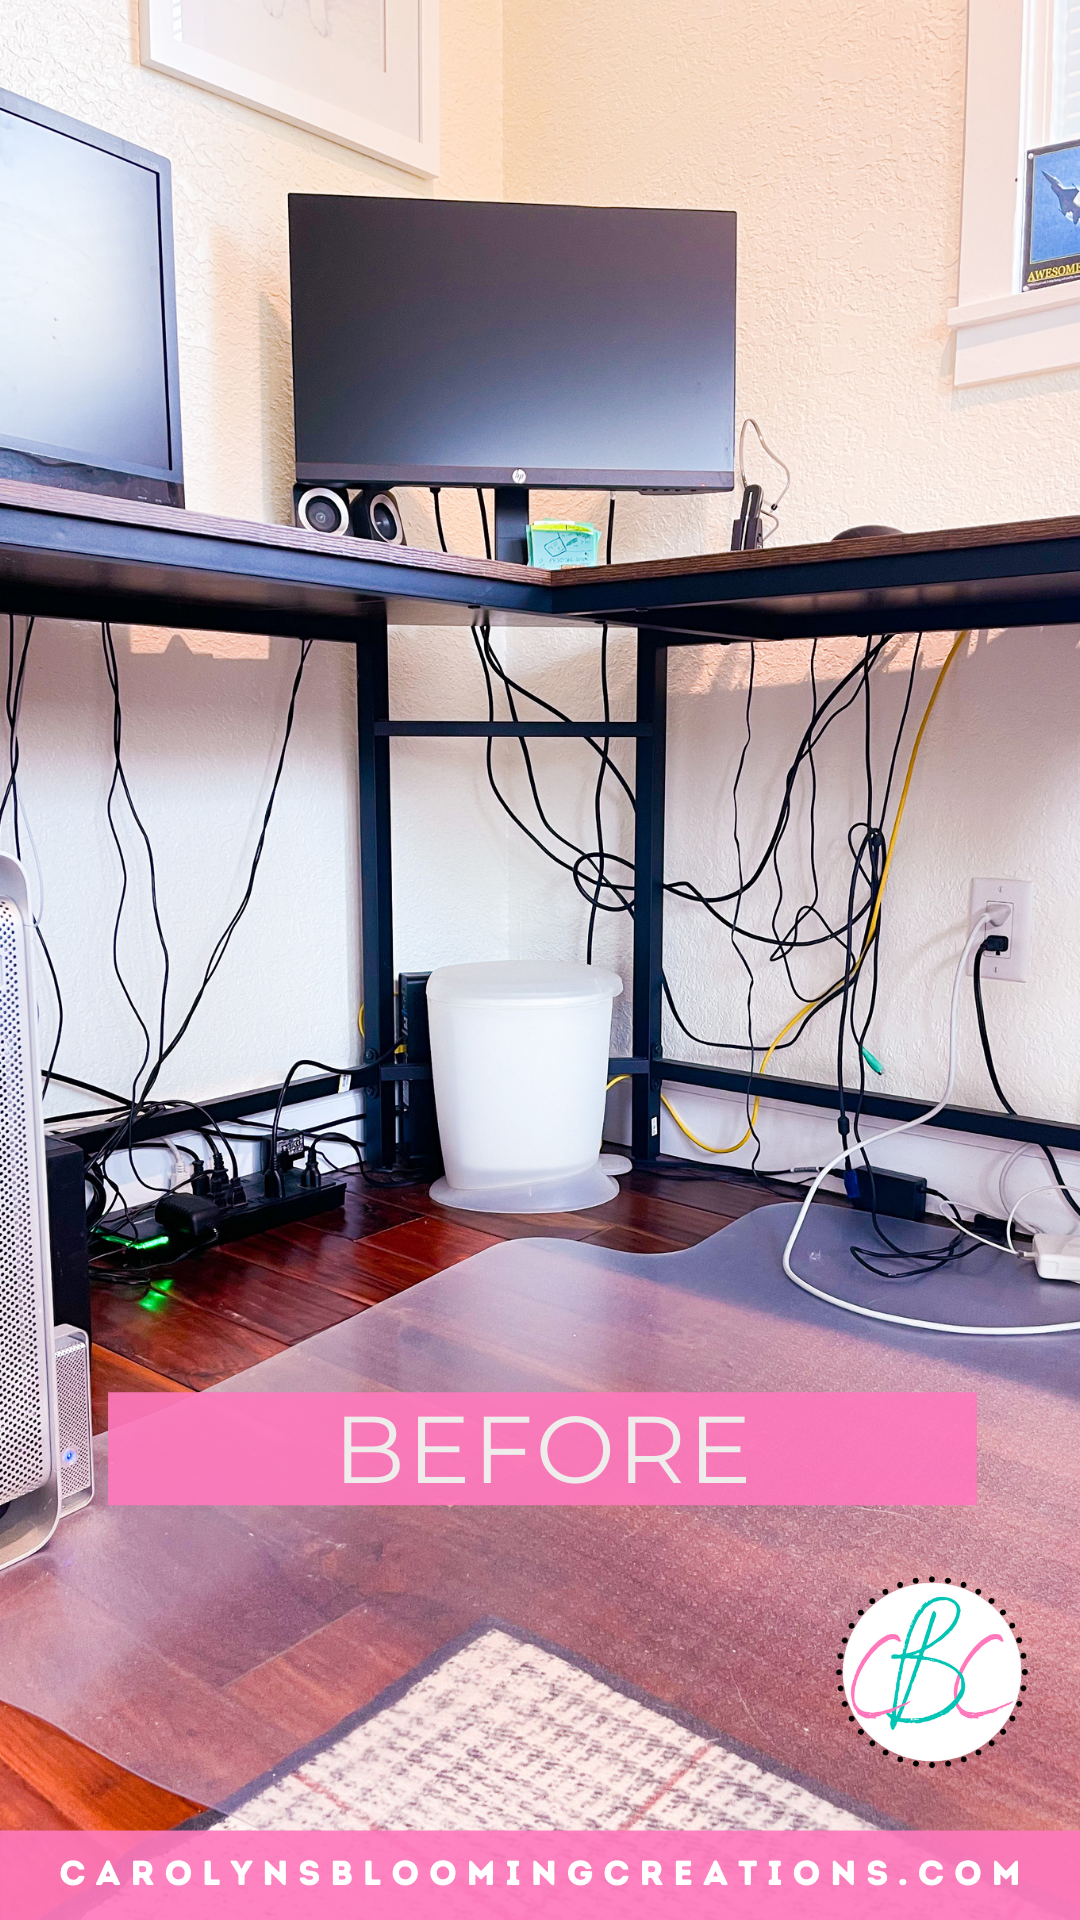 How To Hide Computer Cords In A Home Office - Rambling Renovators